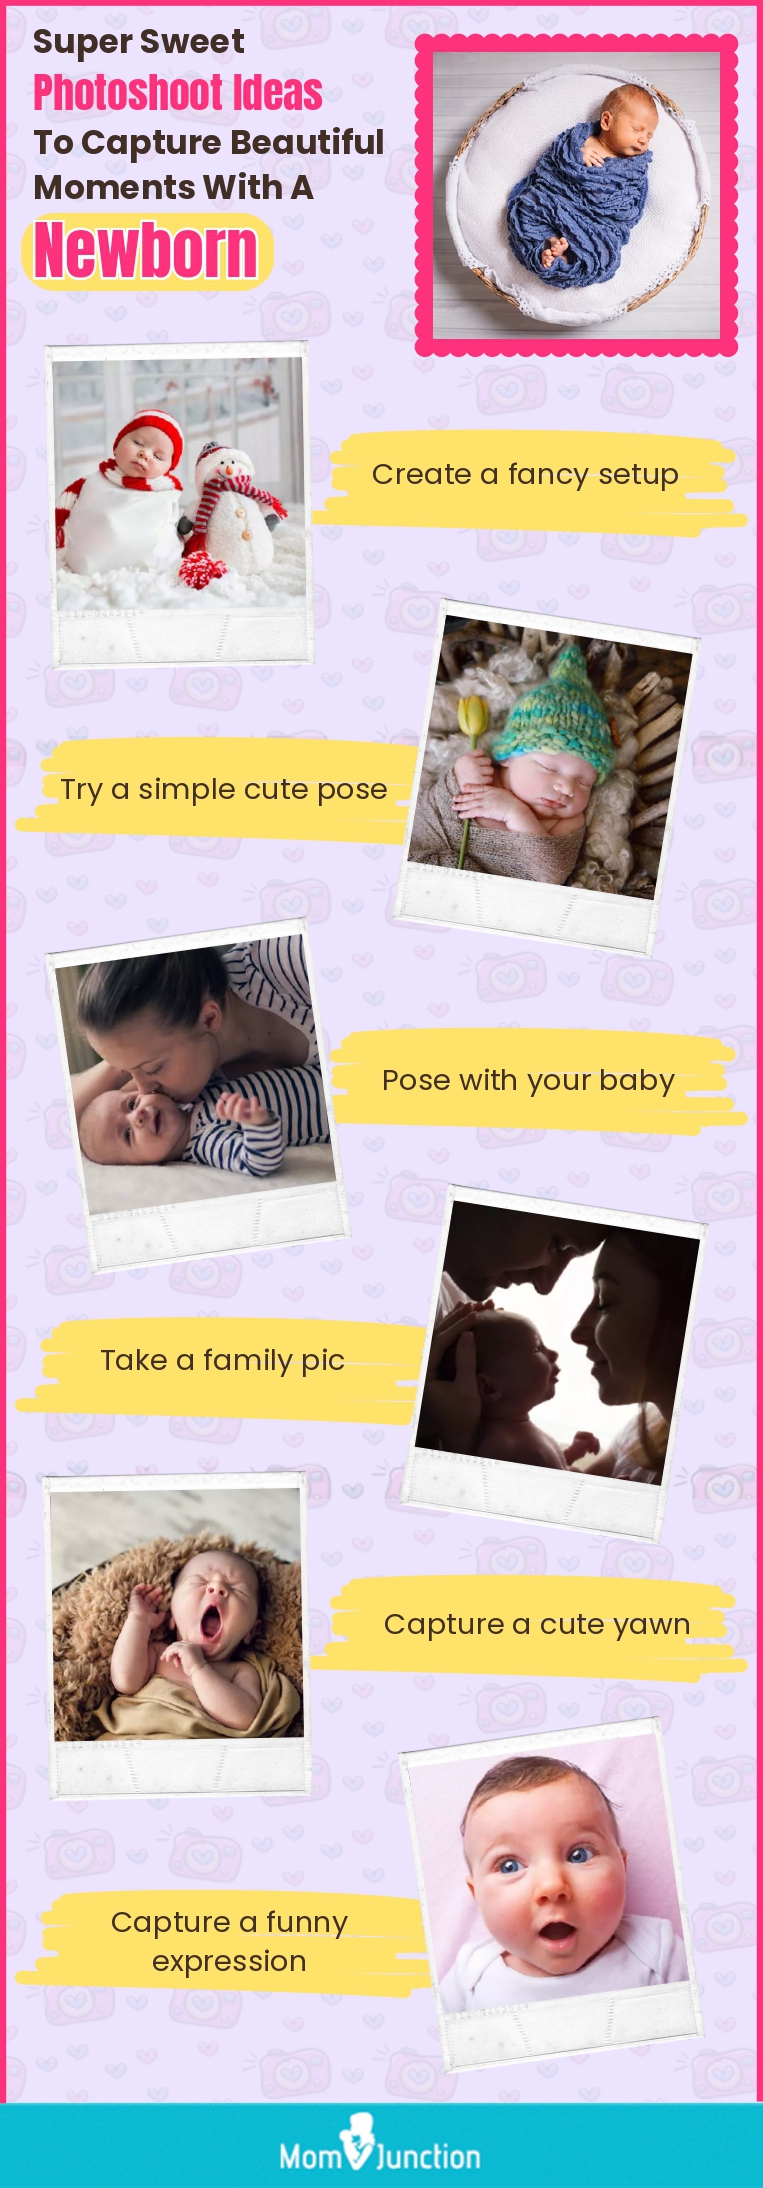 super sweet photoshoot ideas to capture beautiful moments with a newborn (infographic)